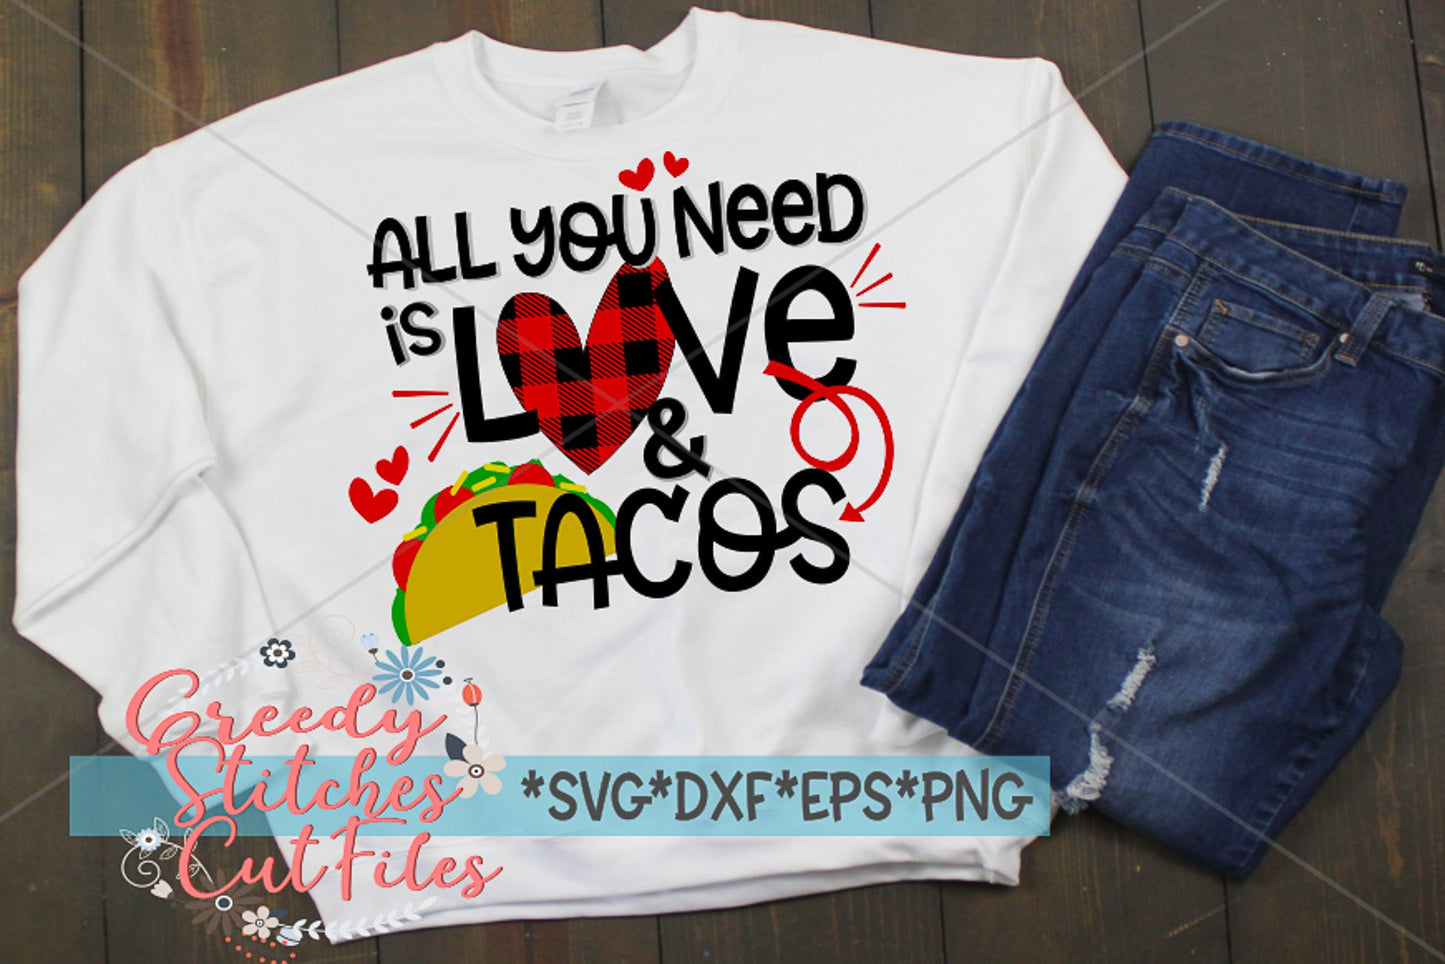 Valentine&#39;s Day SvG | All You Need Is Love & Tacos  svg, dxf, eps png. Love SVG | Tacos SvG | Valentine SvG | Instant Download Cut File